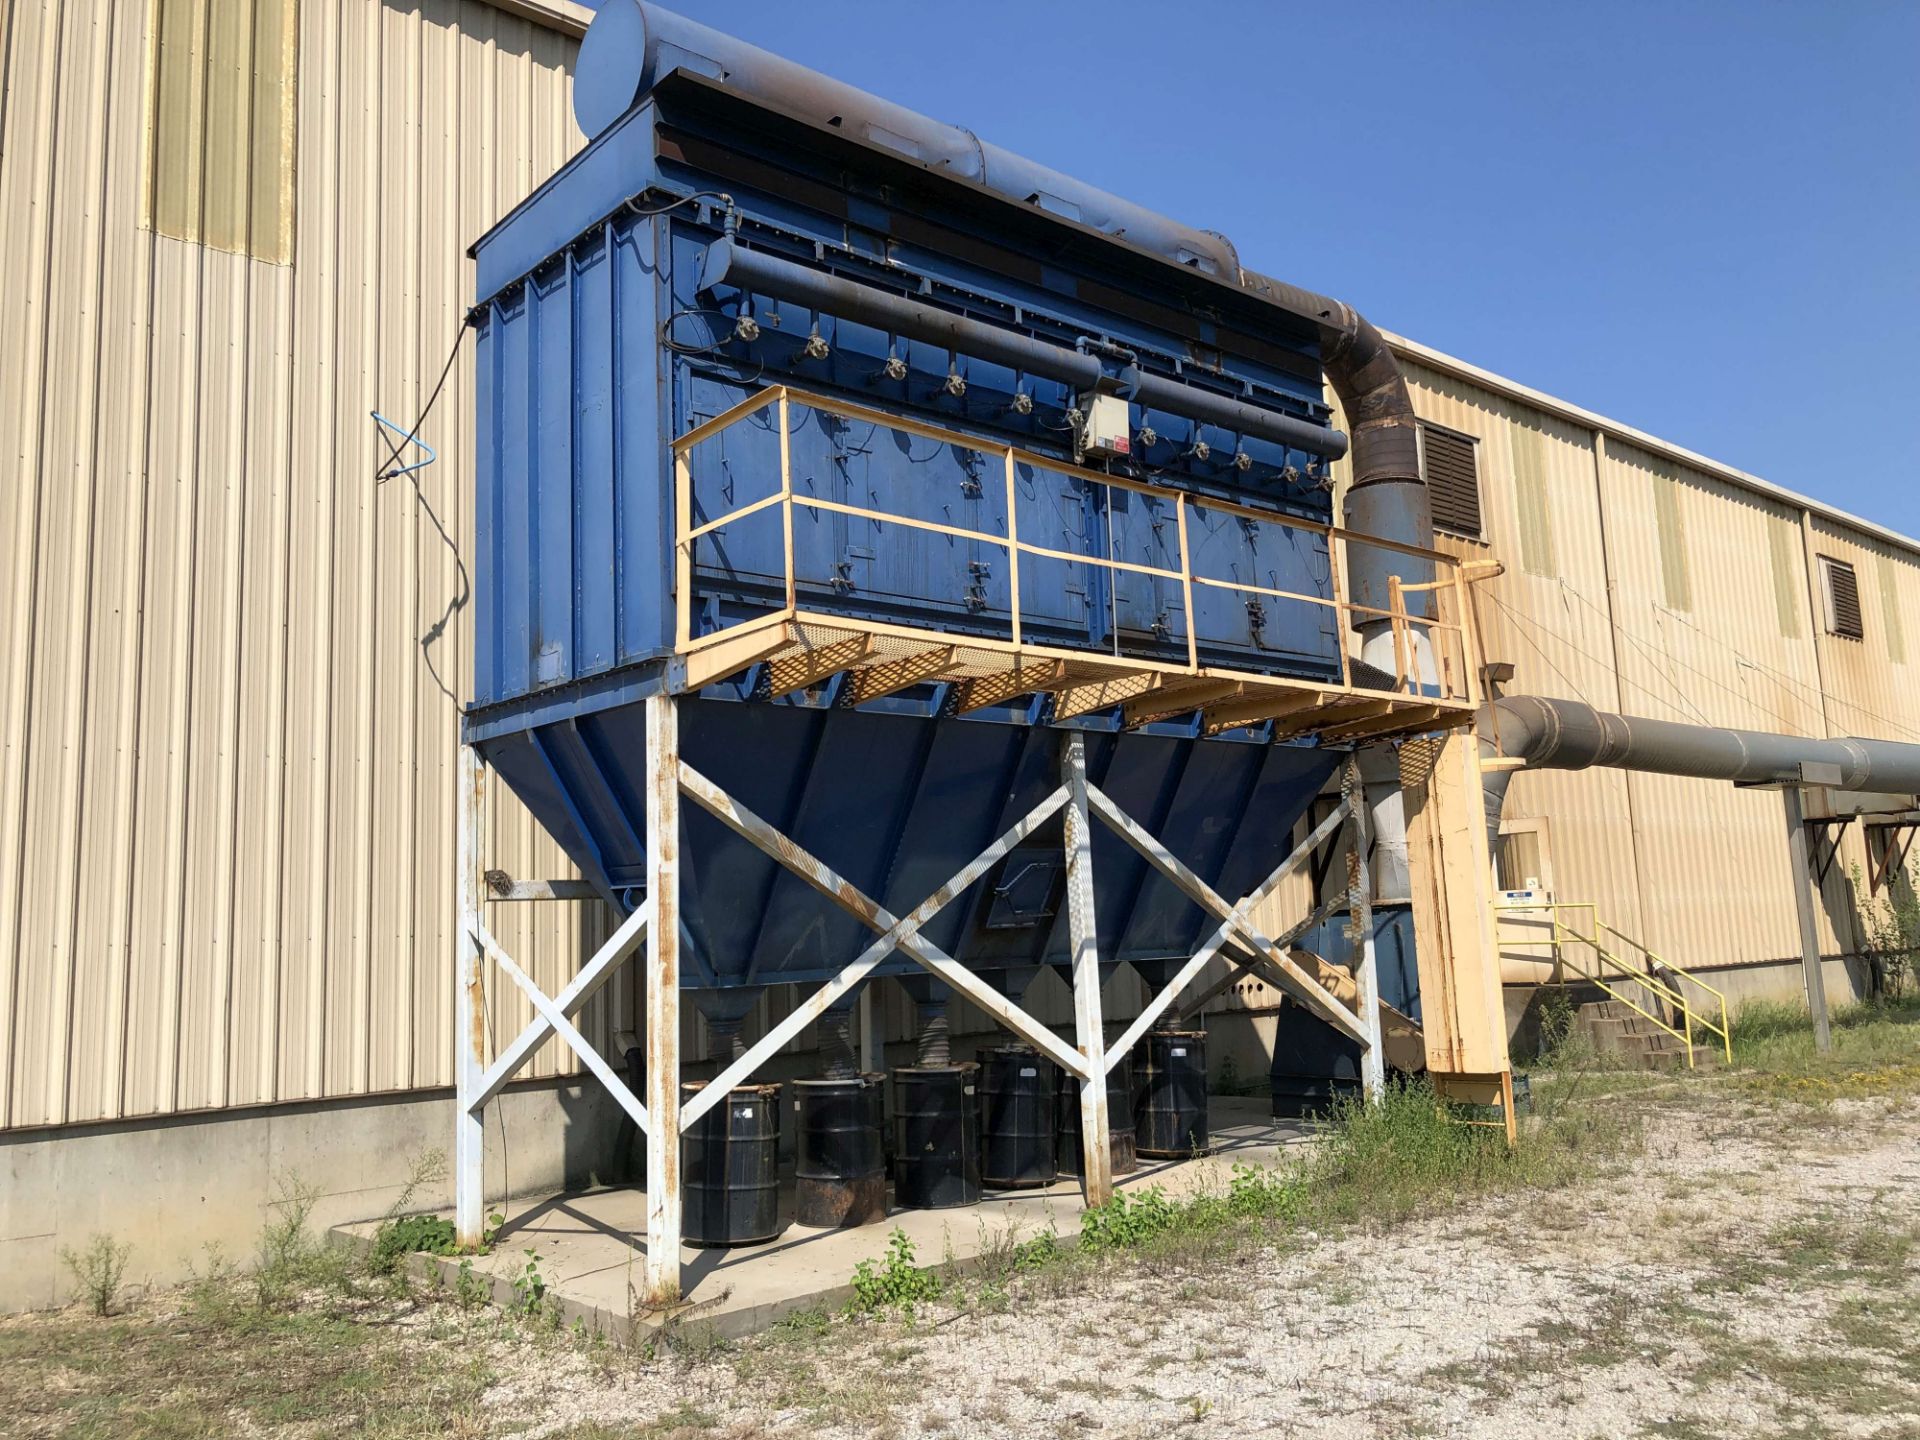 Rodrigue Metal 60 HP Dust Collector, Model MB24, Holds 55 Cartridge Filters, Dimensions: 21' L to R, - Image 3 of 15